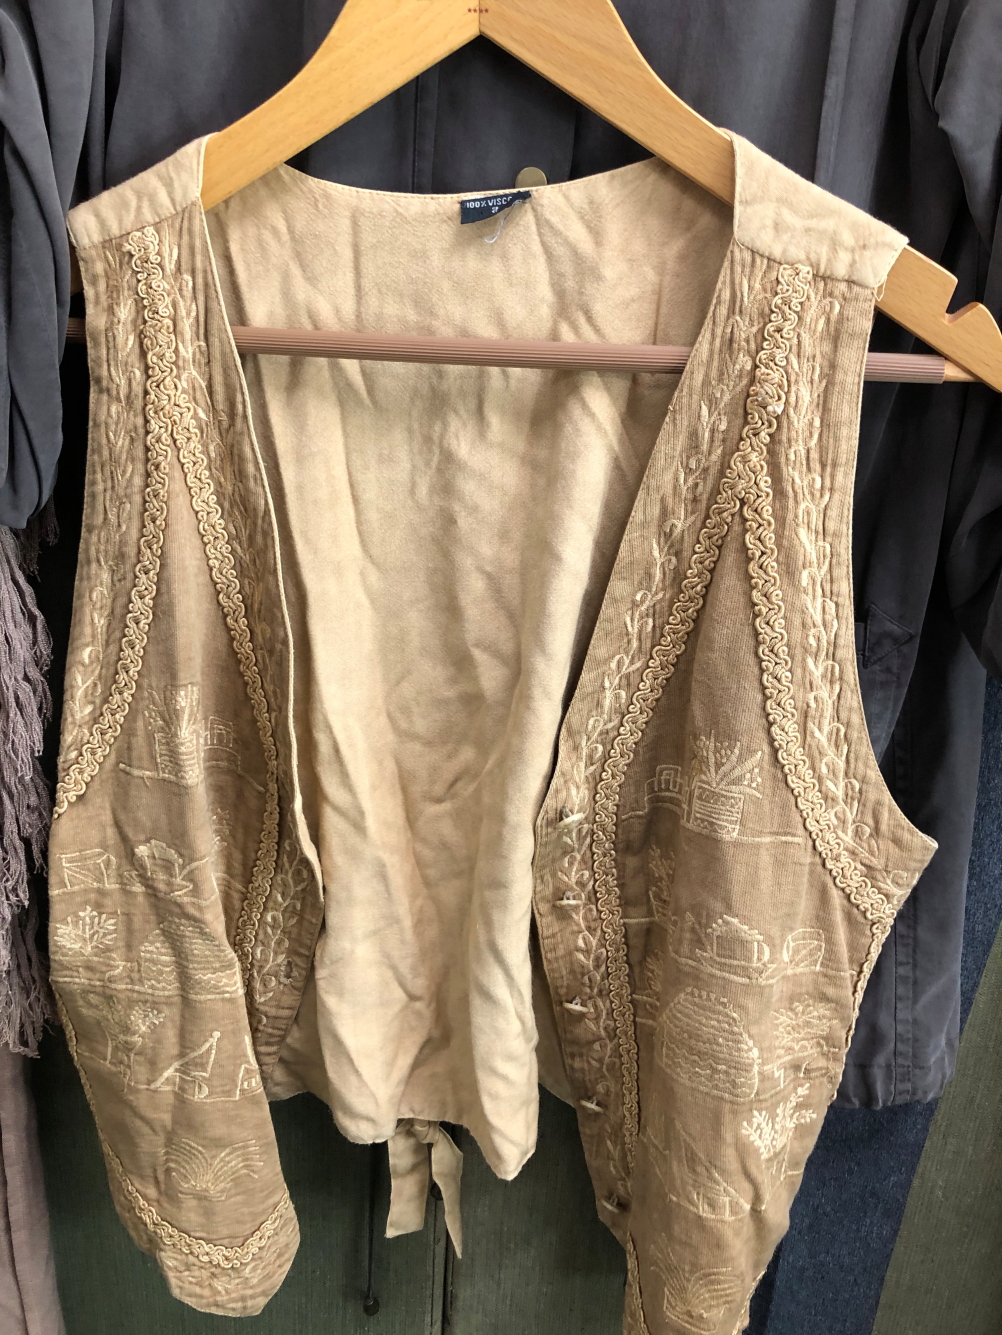 AN AMANDA WAKELEY OLIVE GREEN SILK BLOUSE SIZE 14, TOGETHER WITH A PAIR OF JING WANG FLARED JEANS - Image 2 of 16